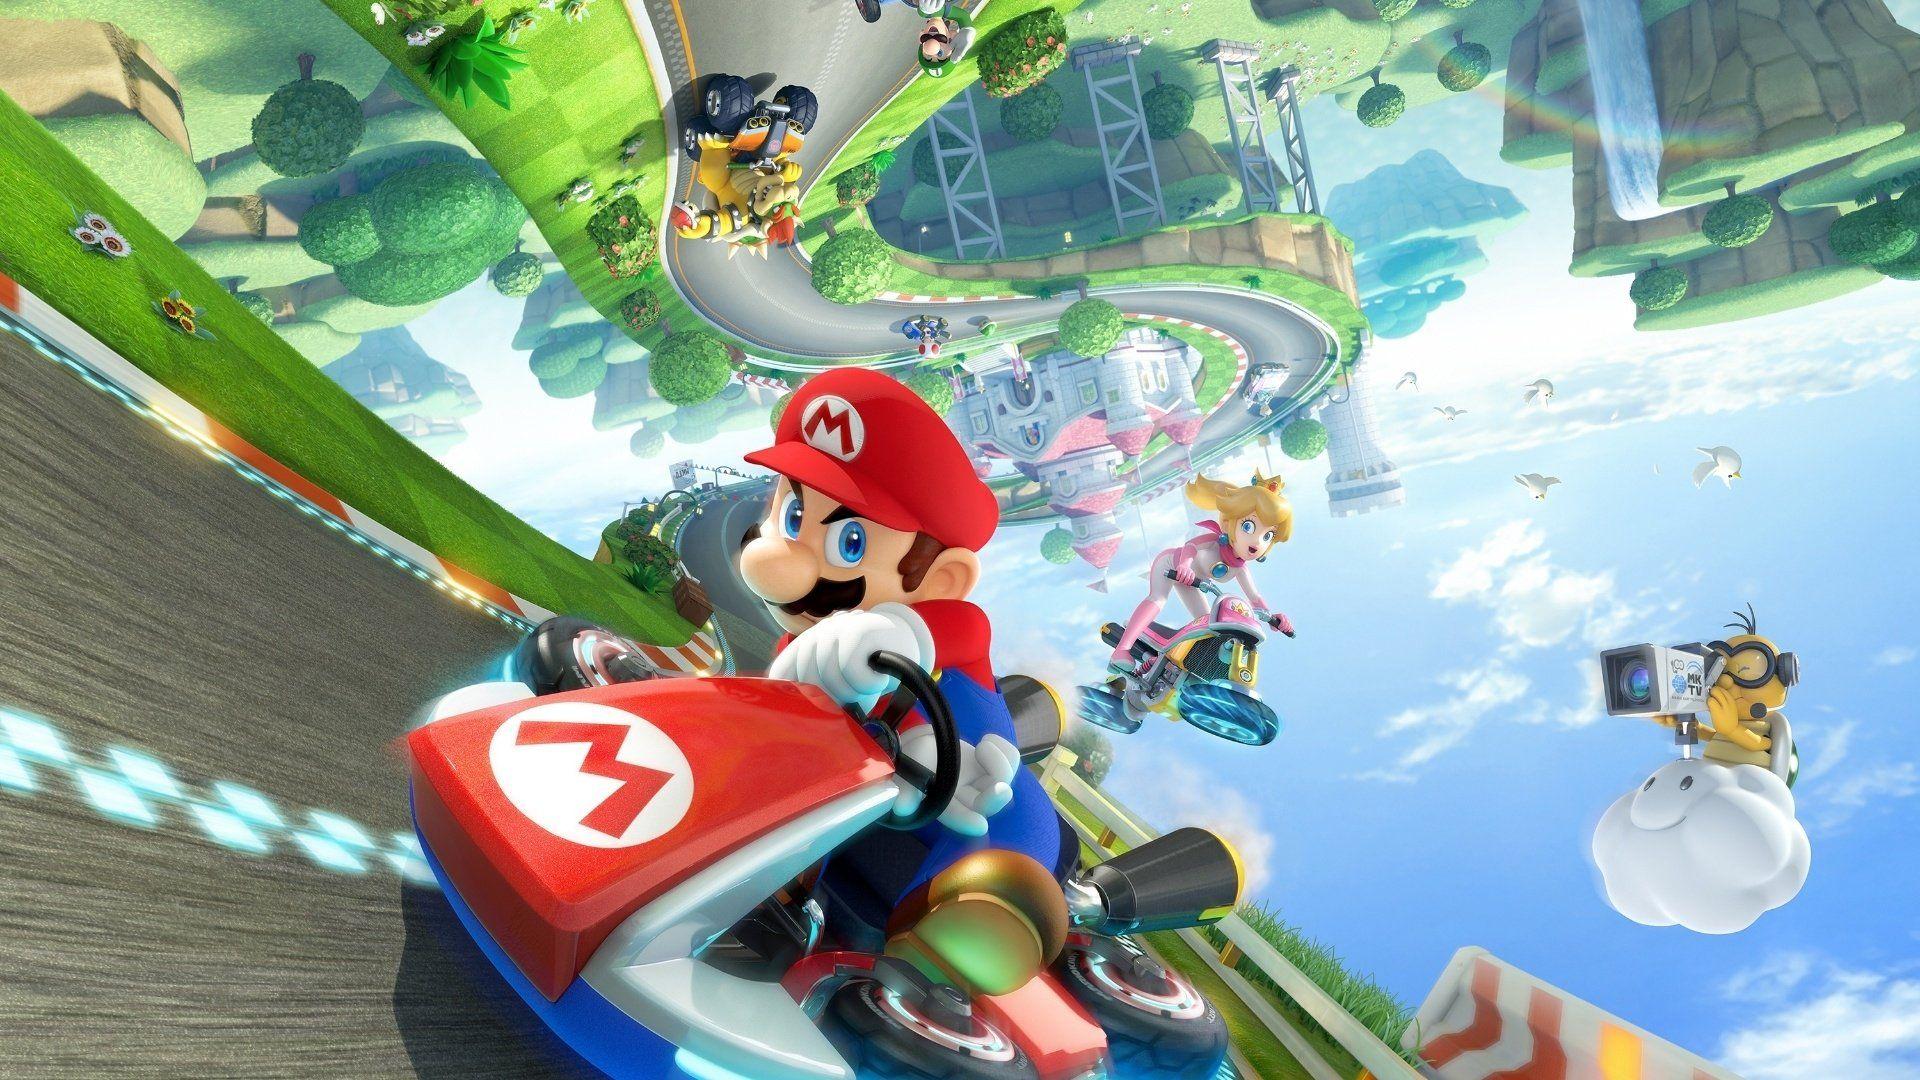 10 Mario Kart 8 HD Wallpapers and Backgrounds